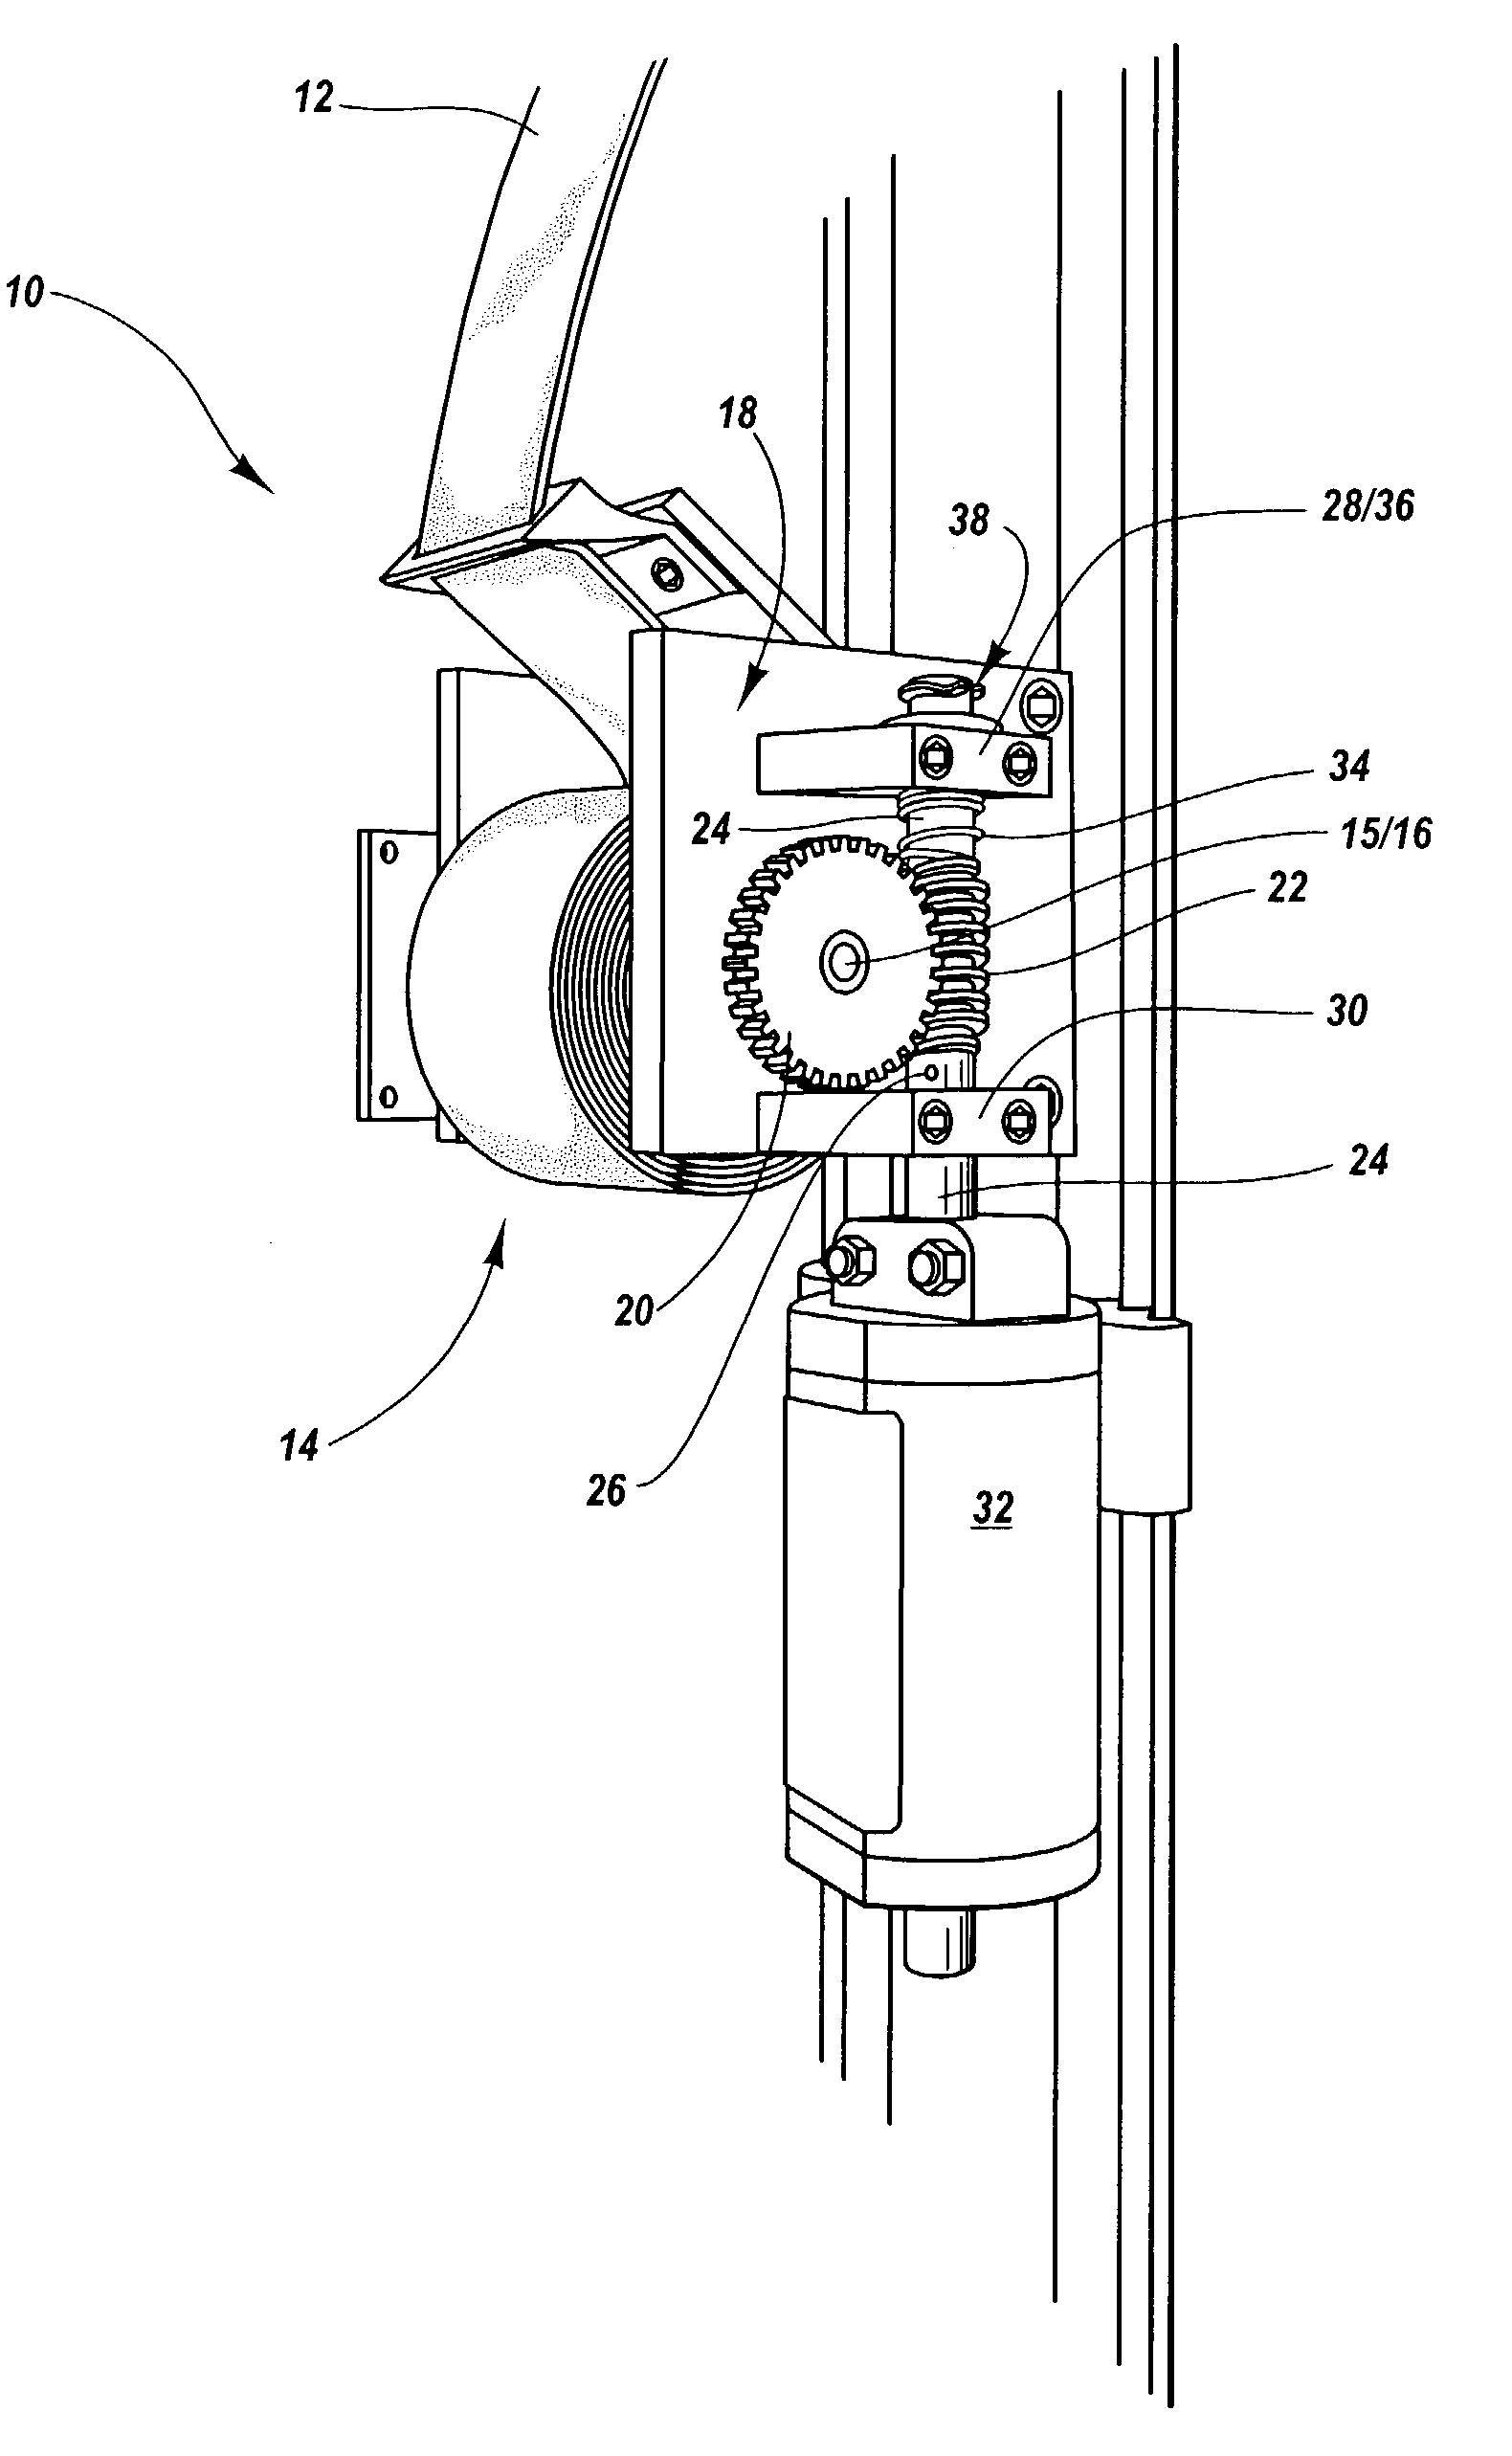 Electric seat belt retractor system